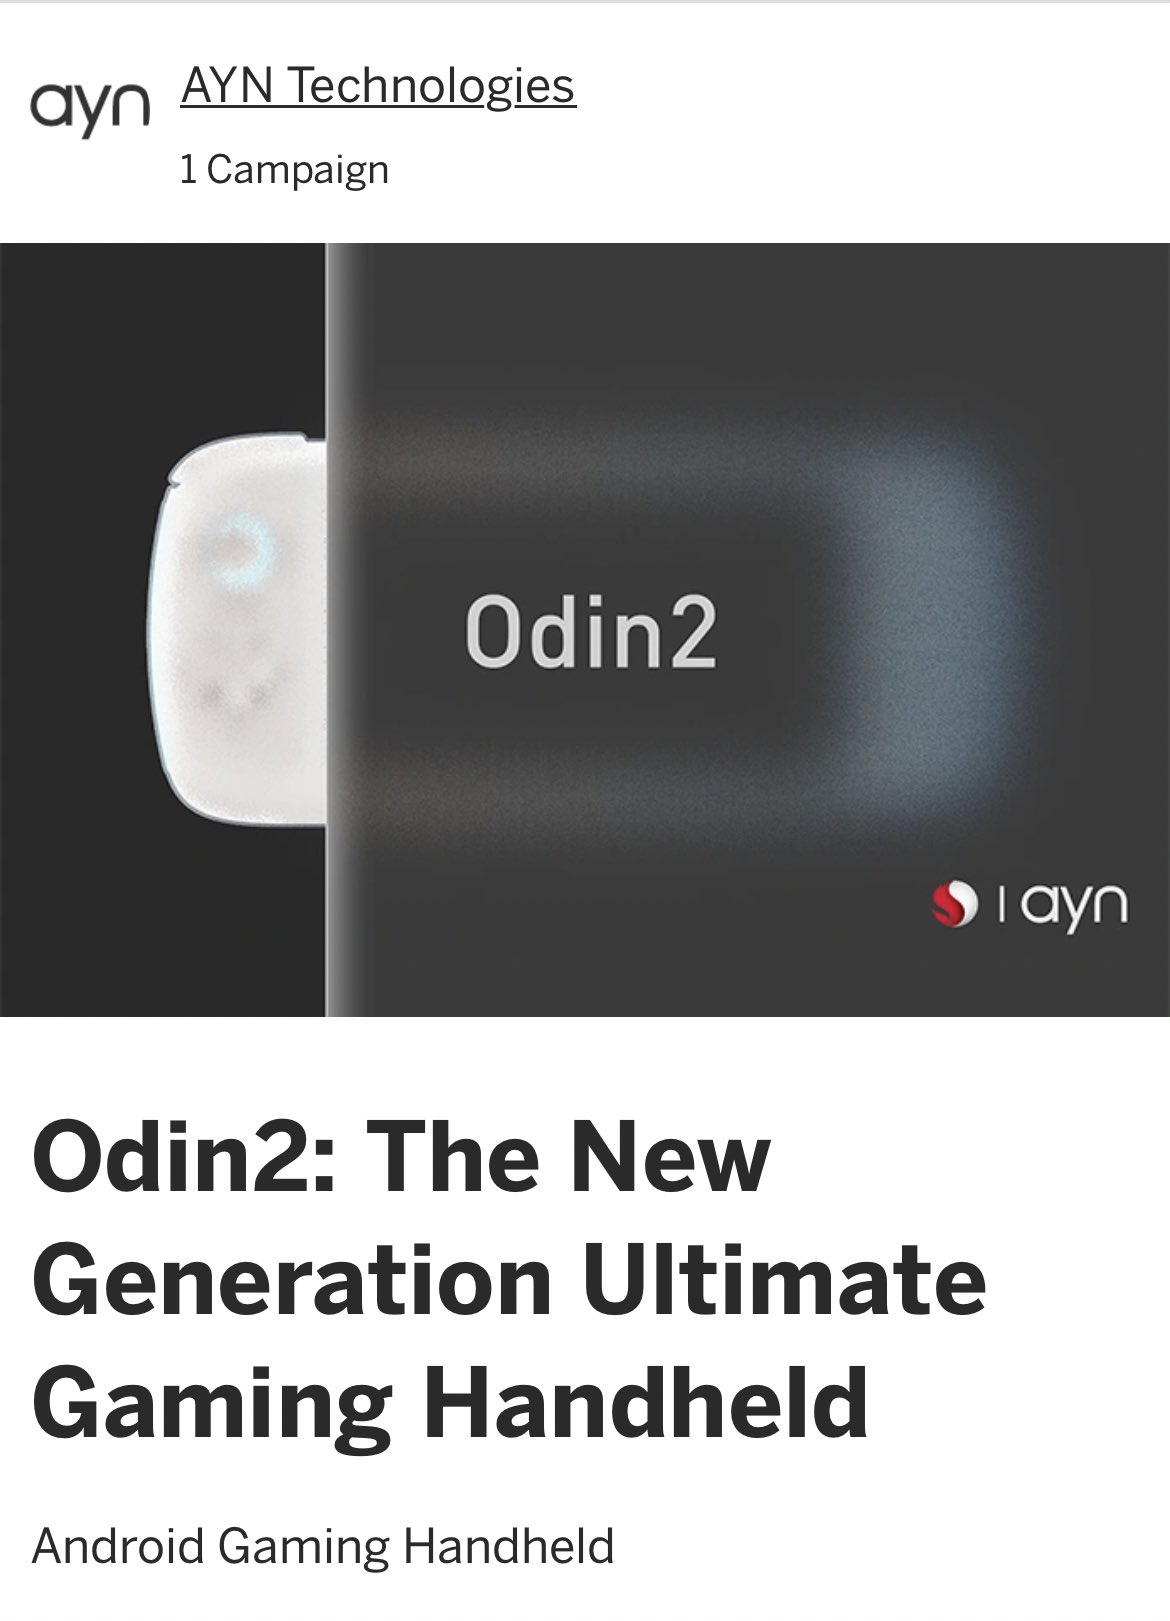 Odin: The Ultimate Gaming Handheld